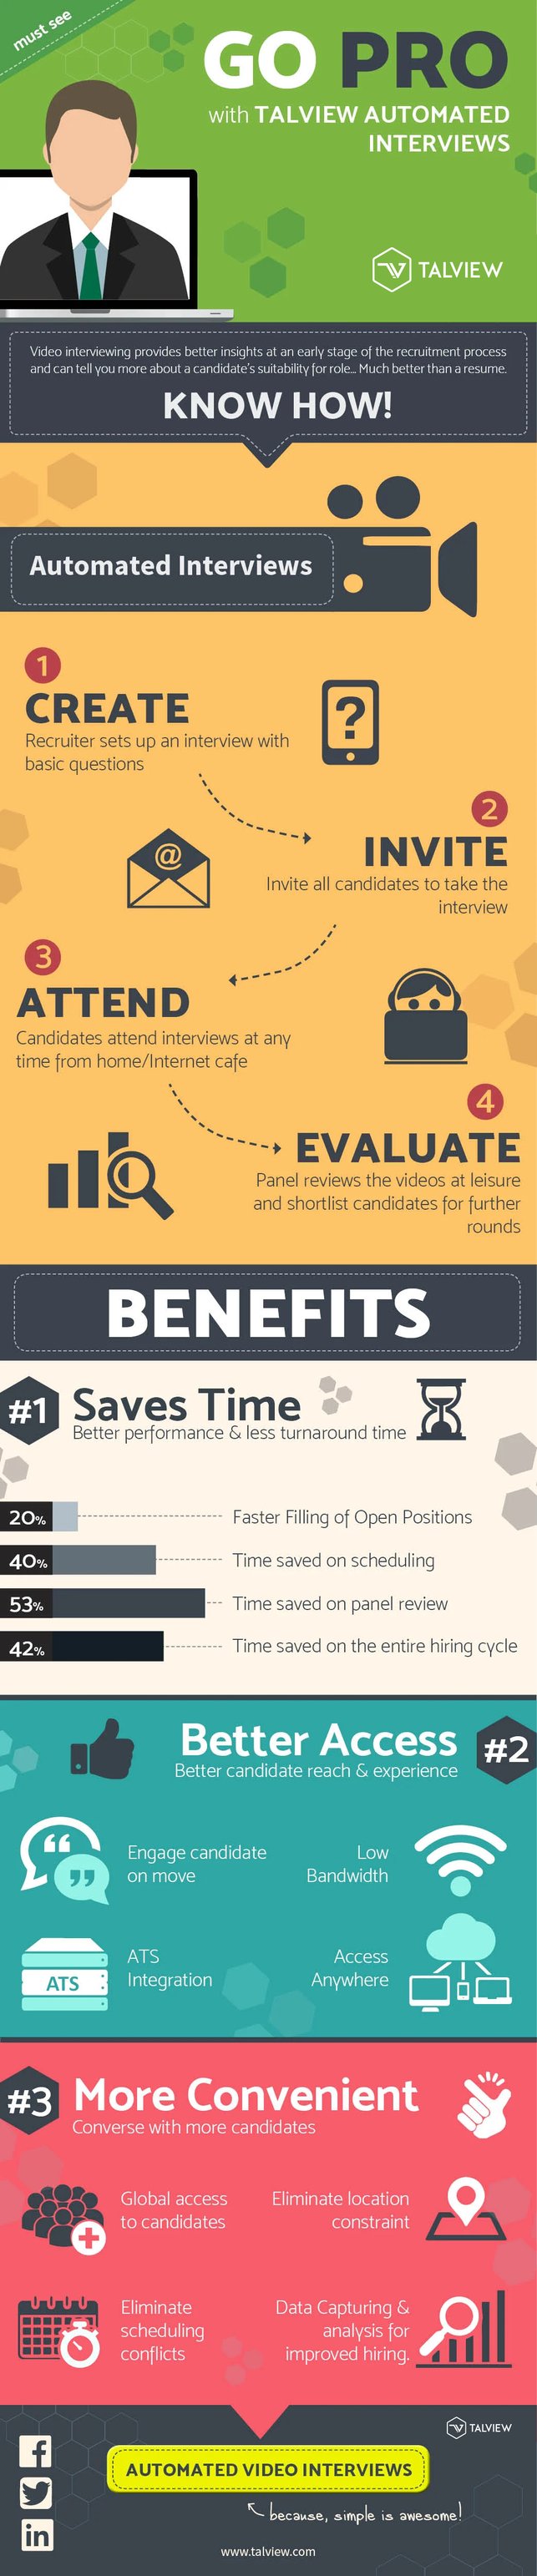 Automated-Video-Interview-Infographic